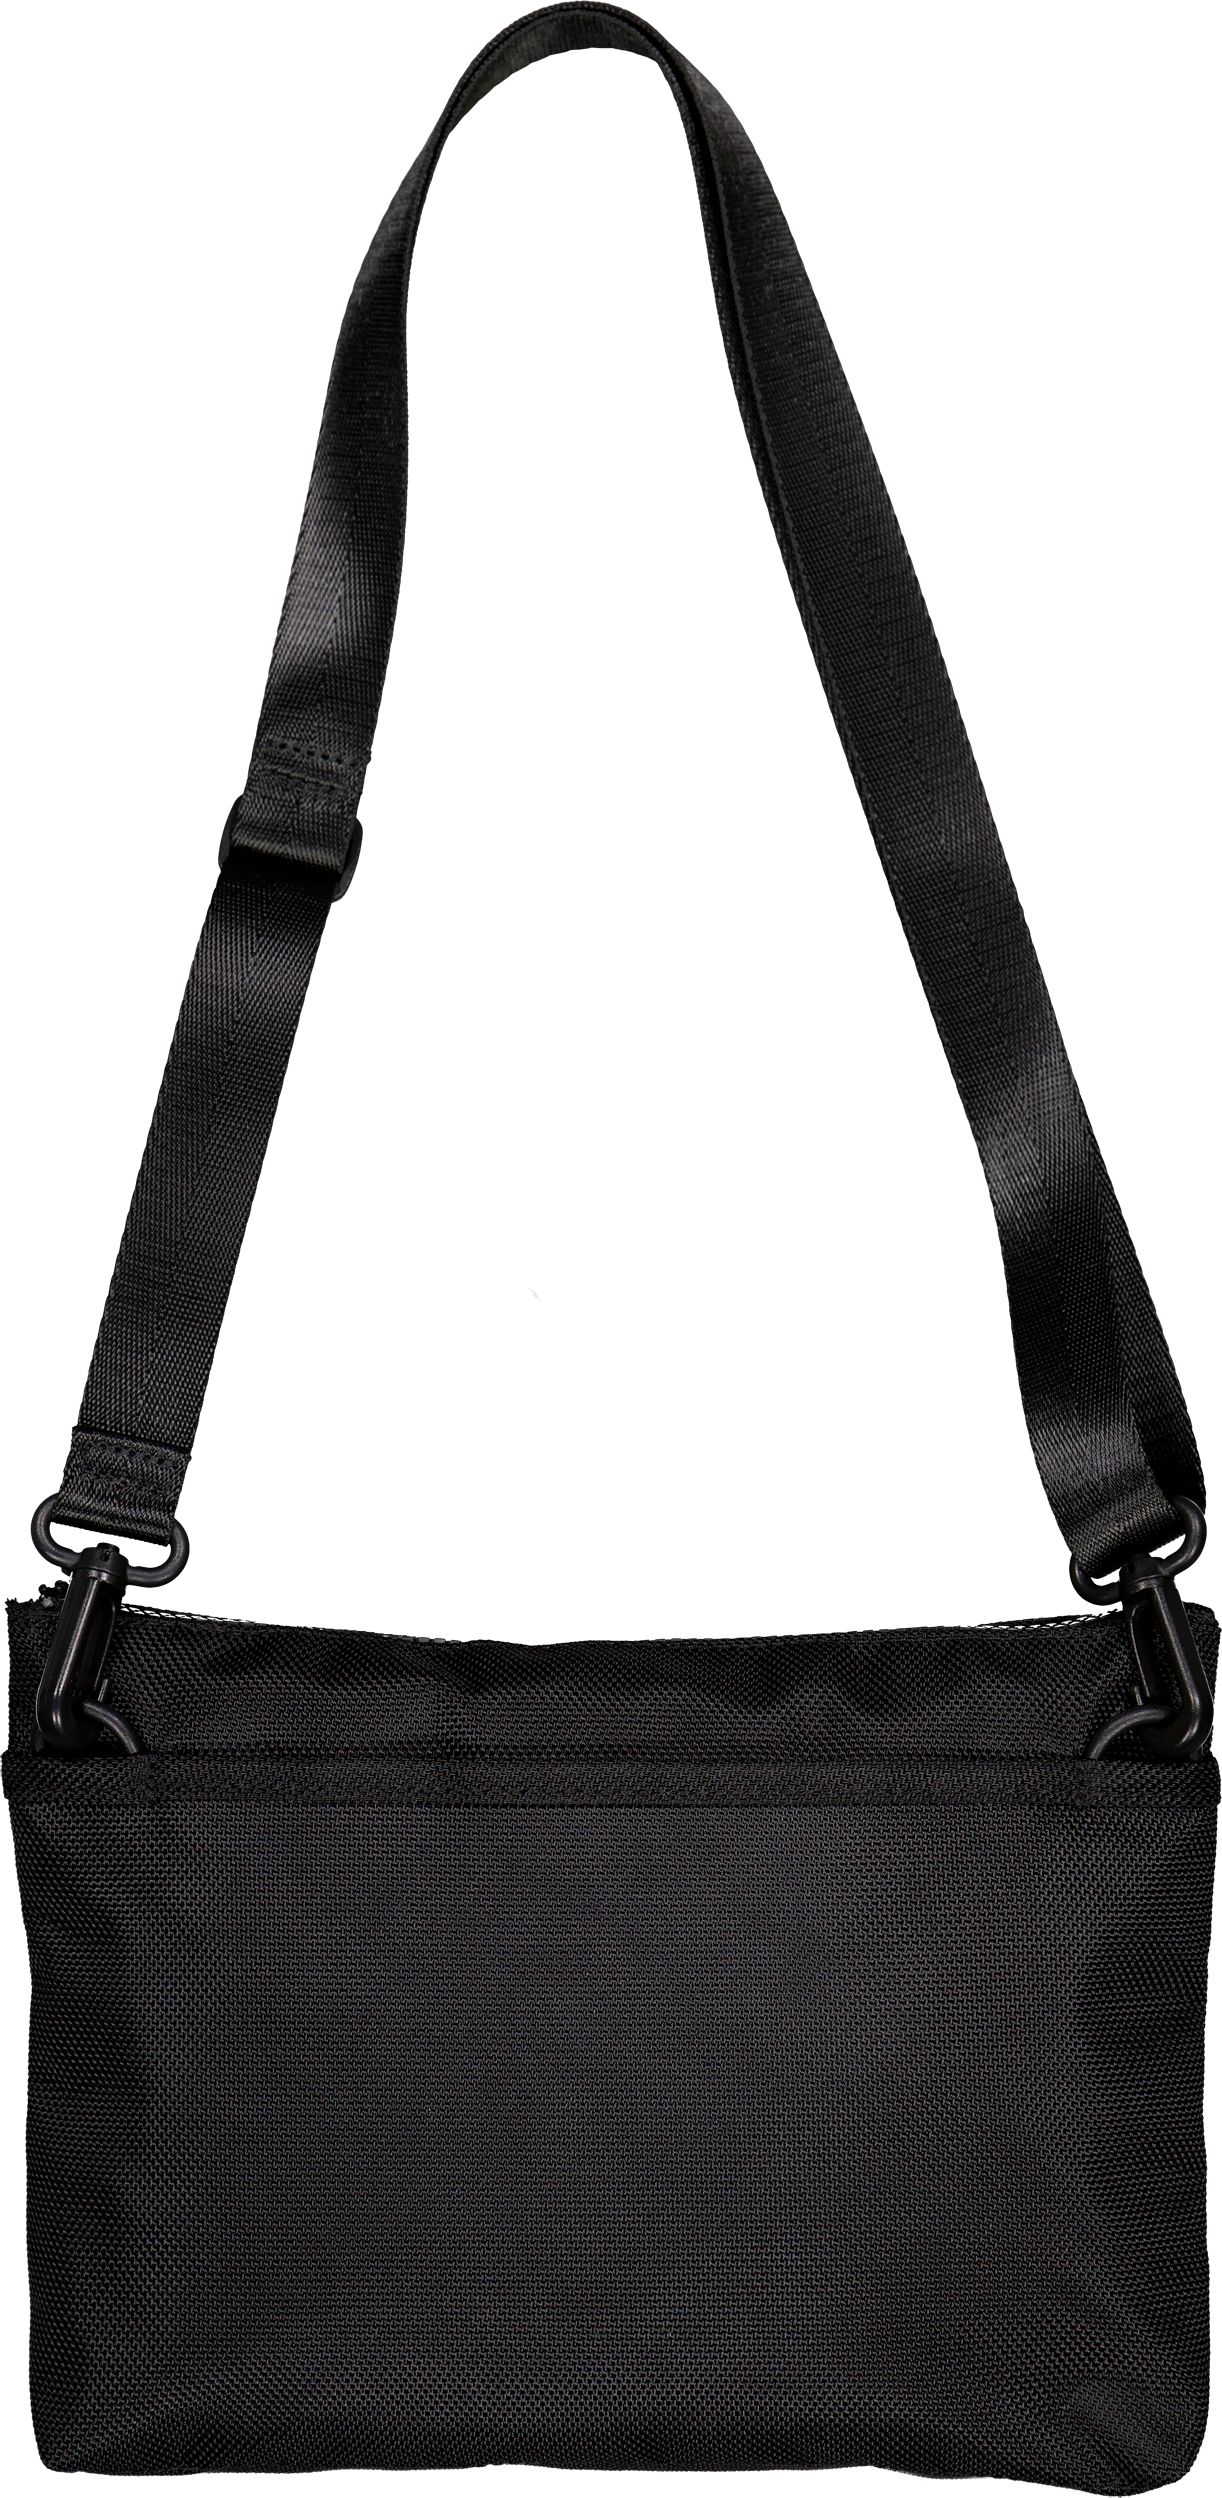 FRED PERRY, CONTRAST TAPE SACOCHE BAG